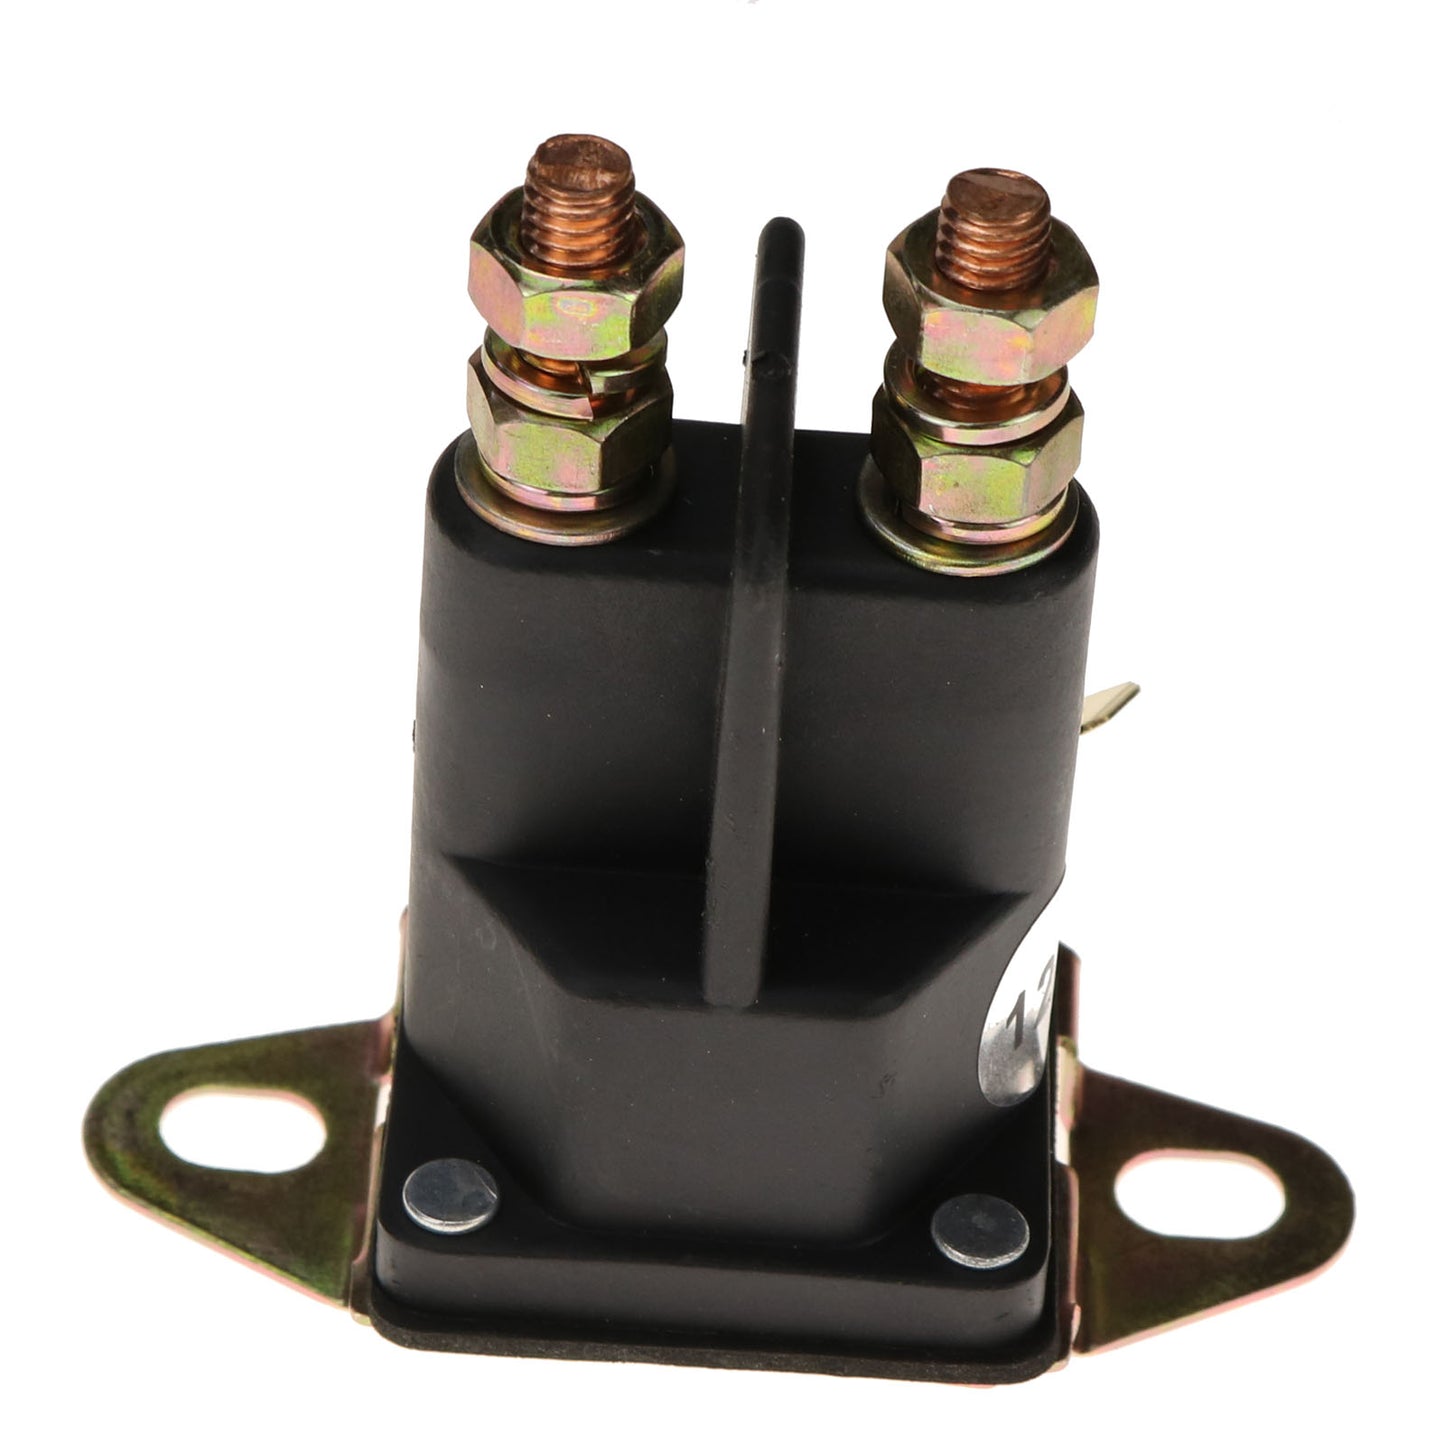 New Solenoid Relay Compatible with Troy Bilt LTX-16 Tractor Bolens/Gilson 1752137 1752137P 1753539 10772 212655 Lawn Mowers